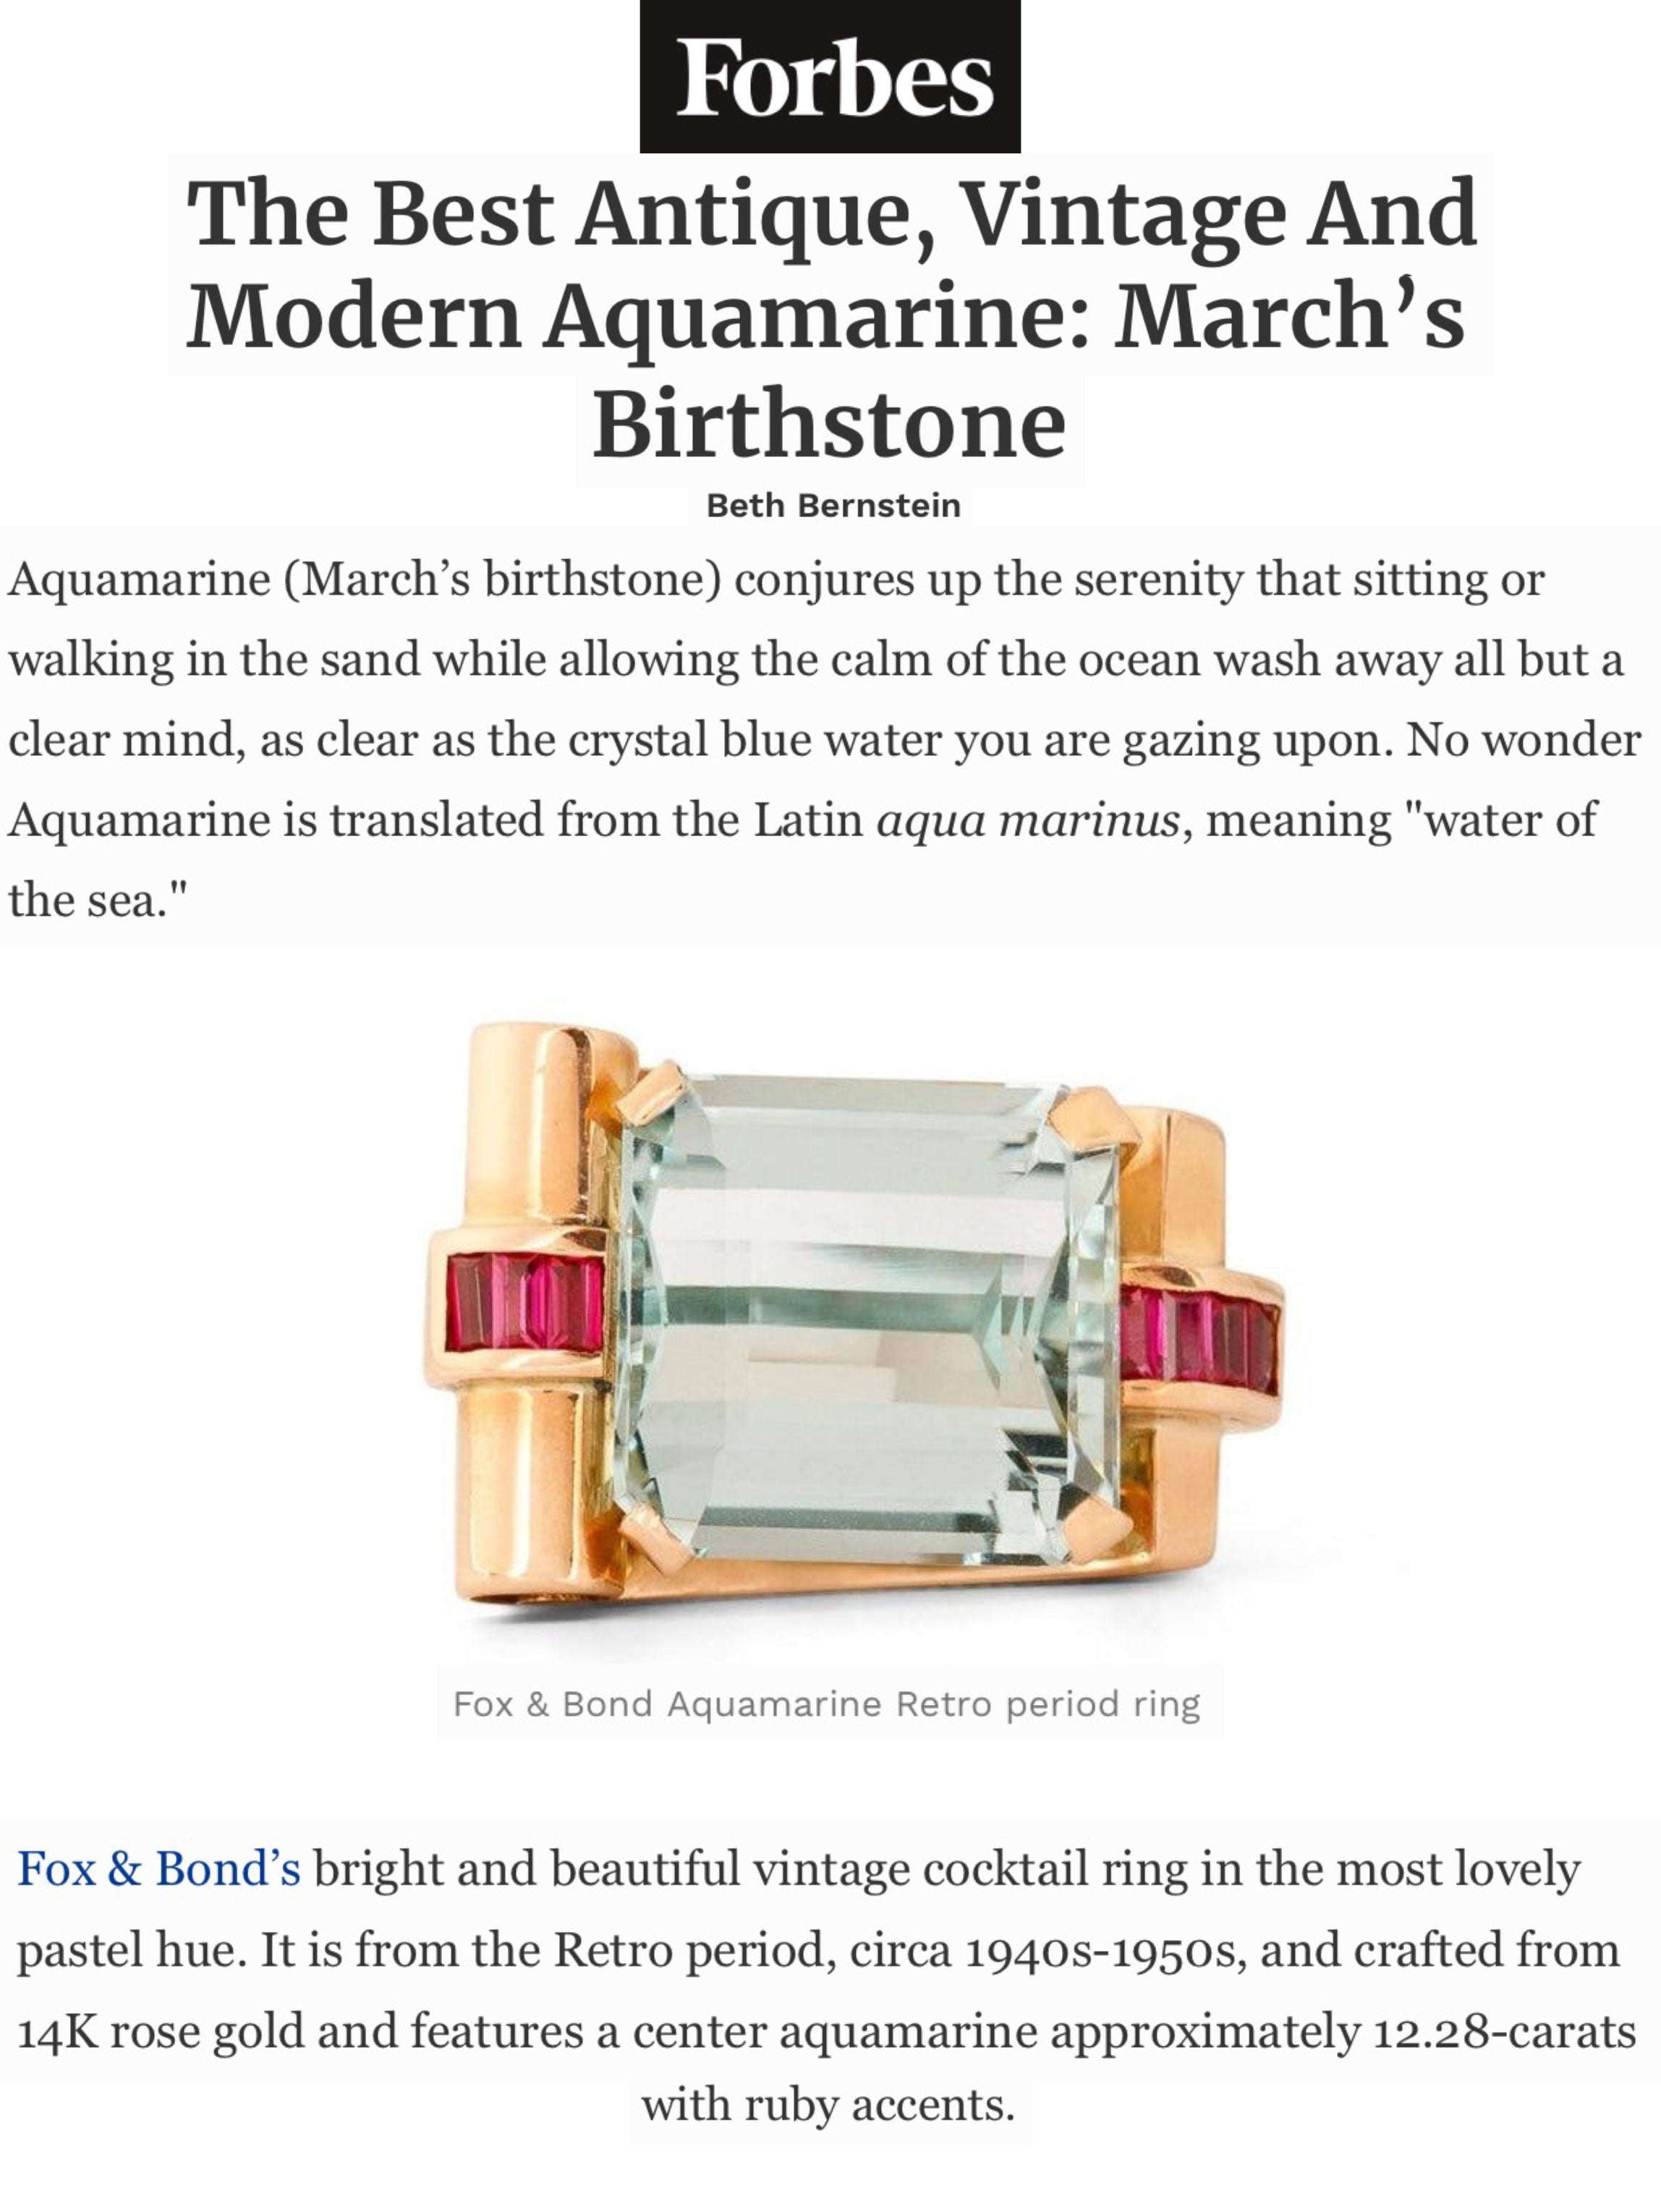 Forbes: The Best Antique, Vintage And Modern Aquamarine: March’s Birthstone